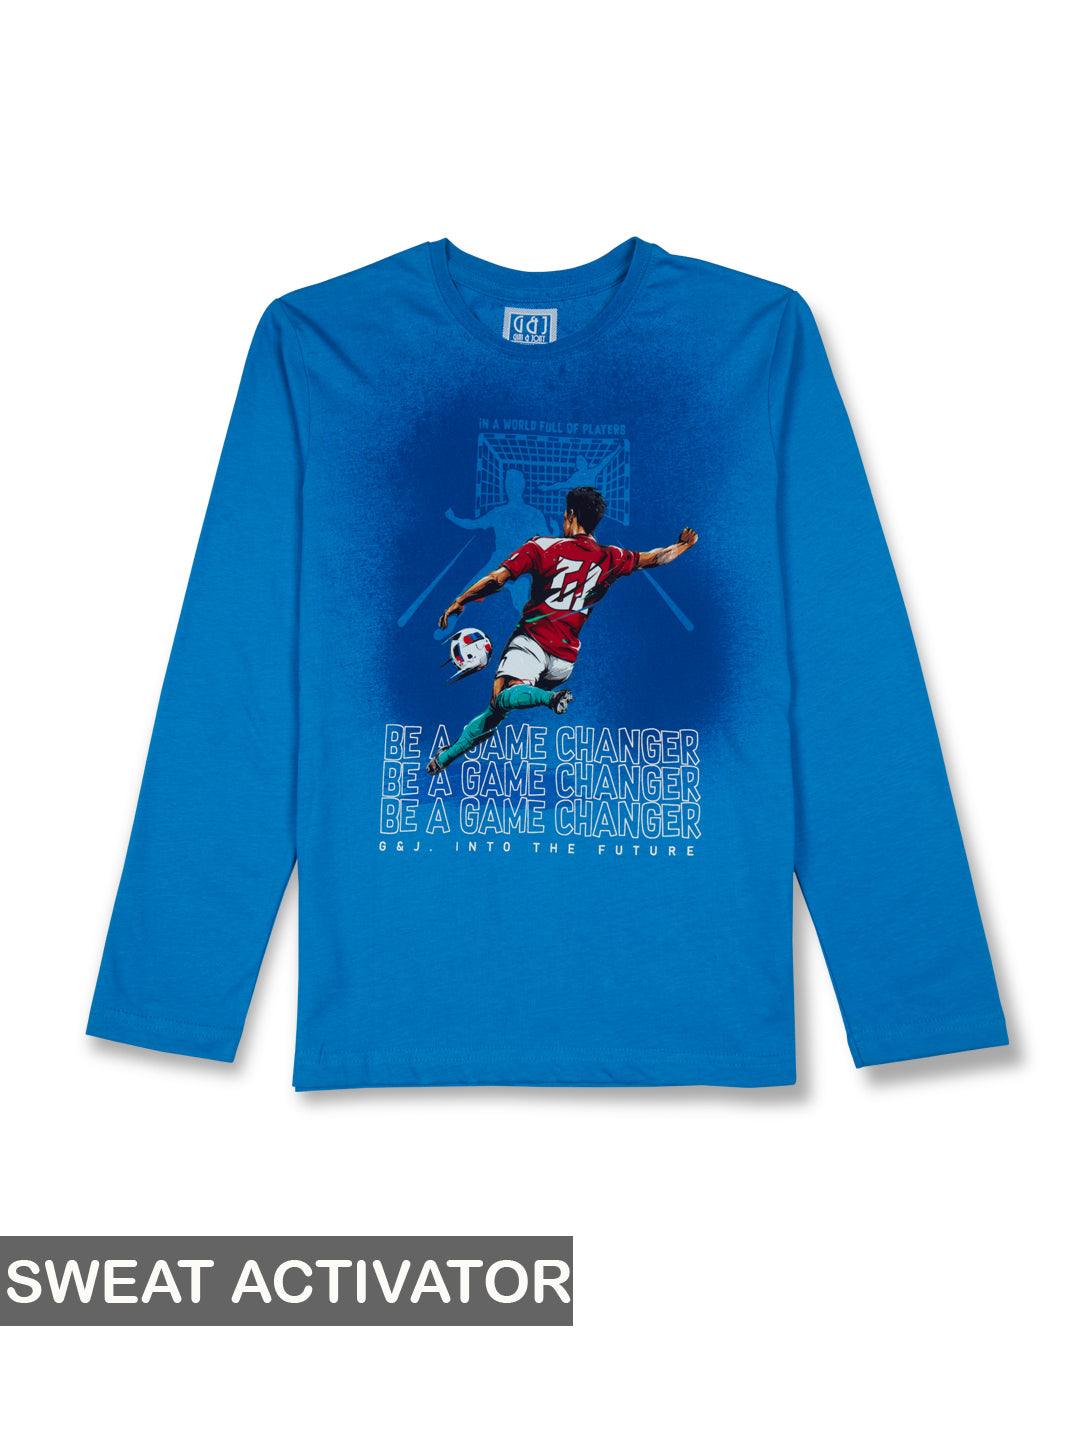 Boys blue round neck knitted cotton printed sweat activated t-shirt